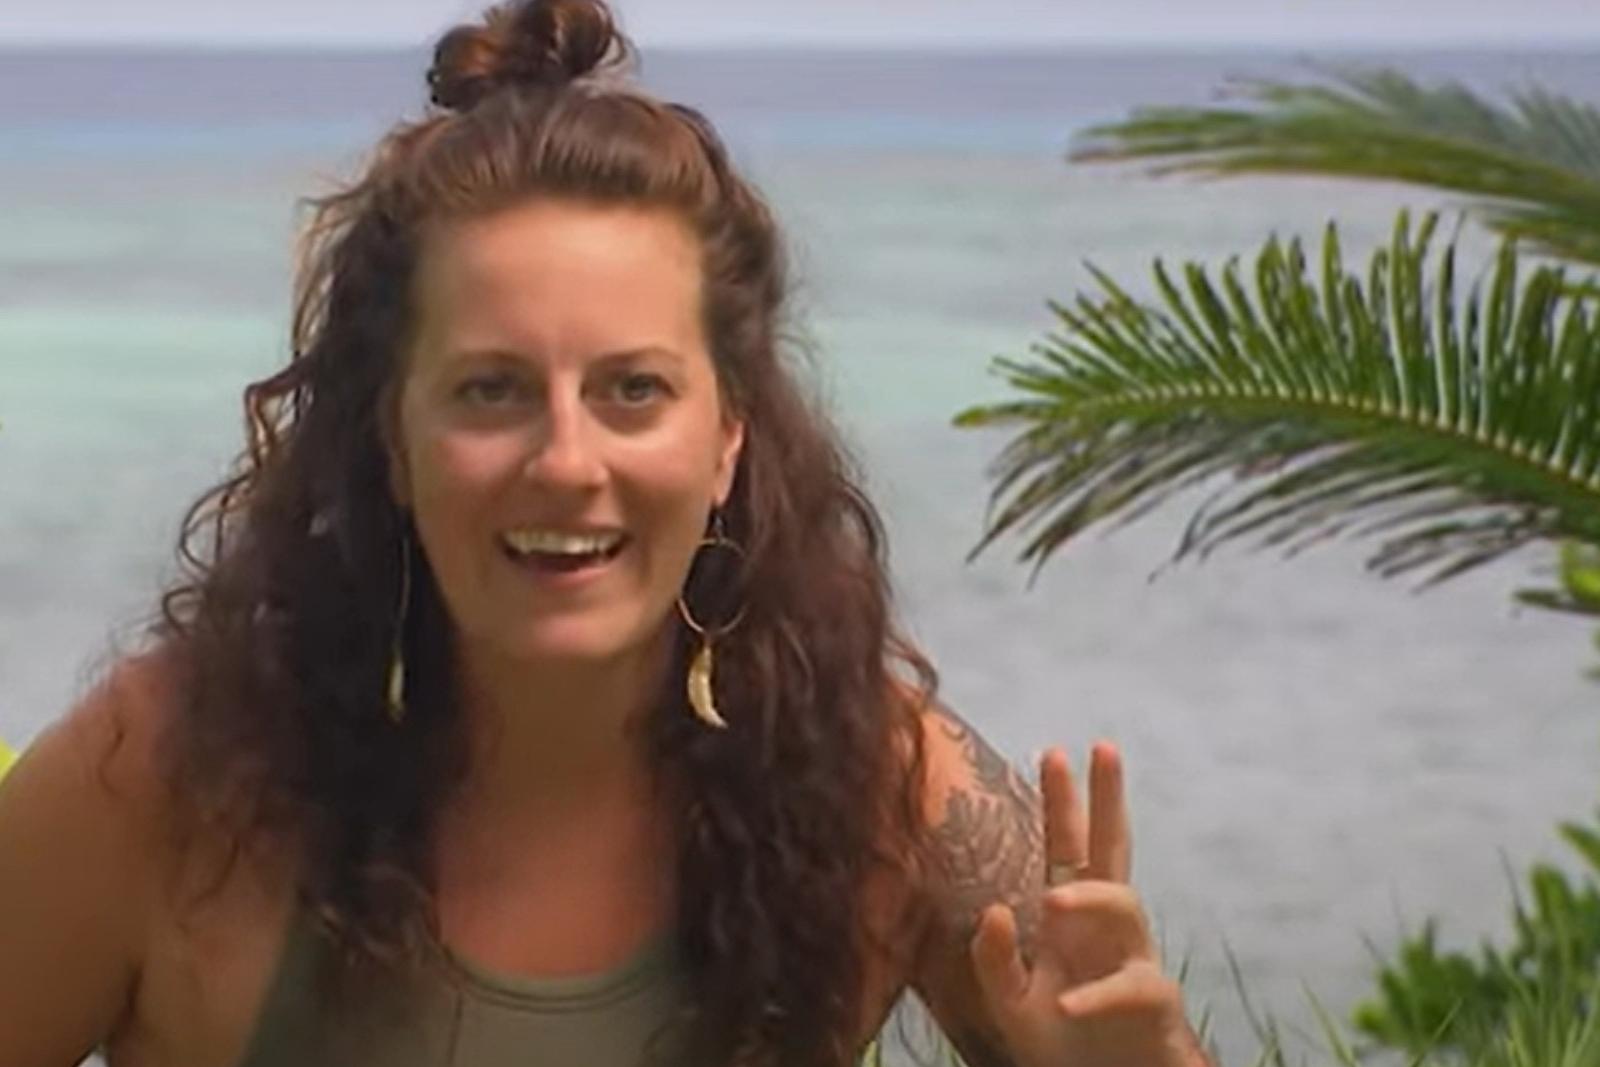 Former Steamboat Springs local takes her place in season 45 'Survivor' cast